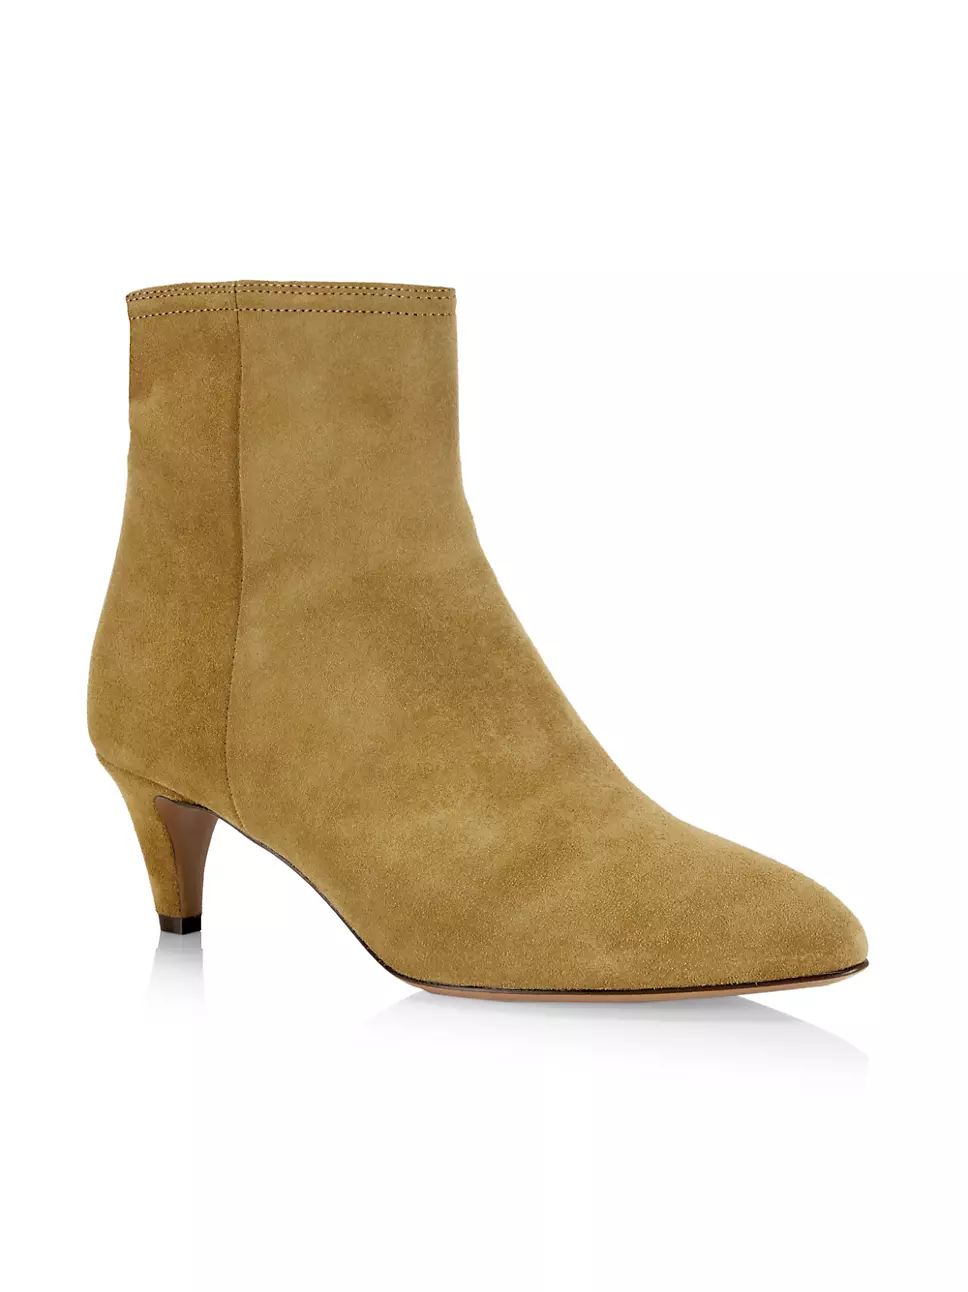 Deone Suede Ankle Boots | Saks Fifth Avenue